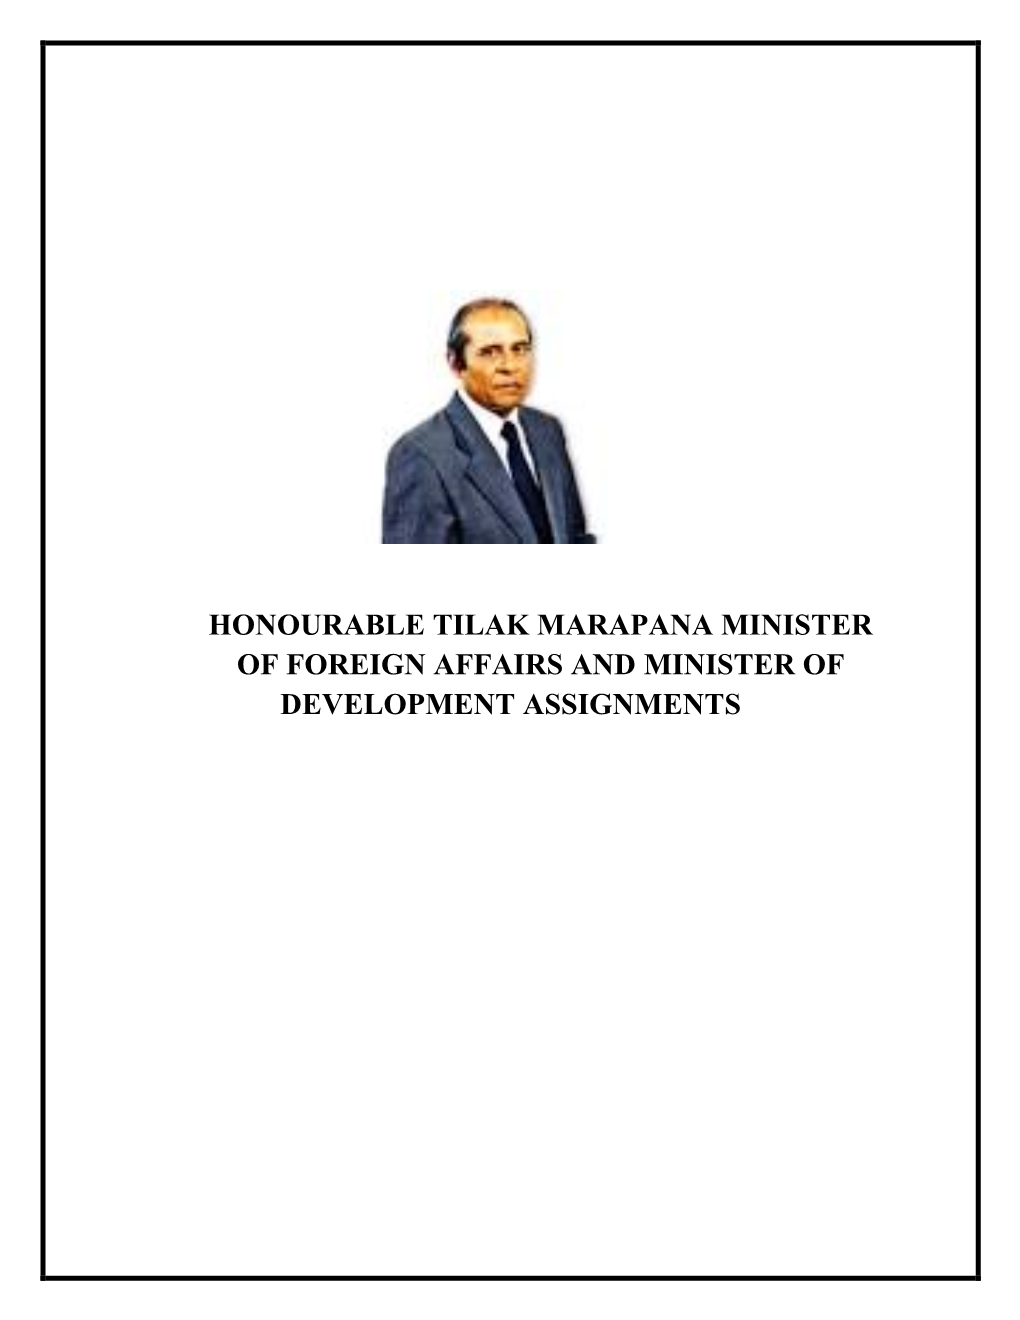 Honourable Tilak Marapana Minister of Foreign Affairs and Minister of Development Assignments